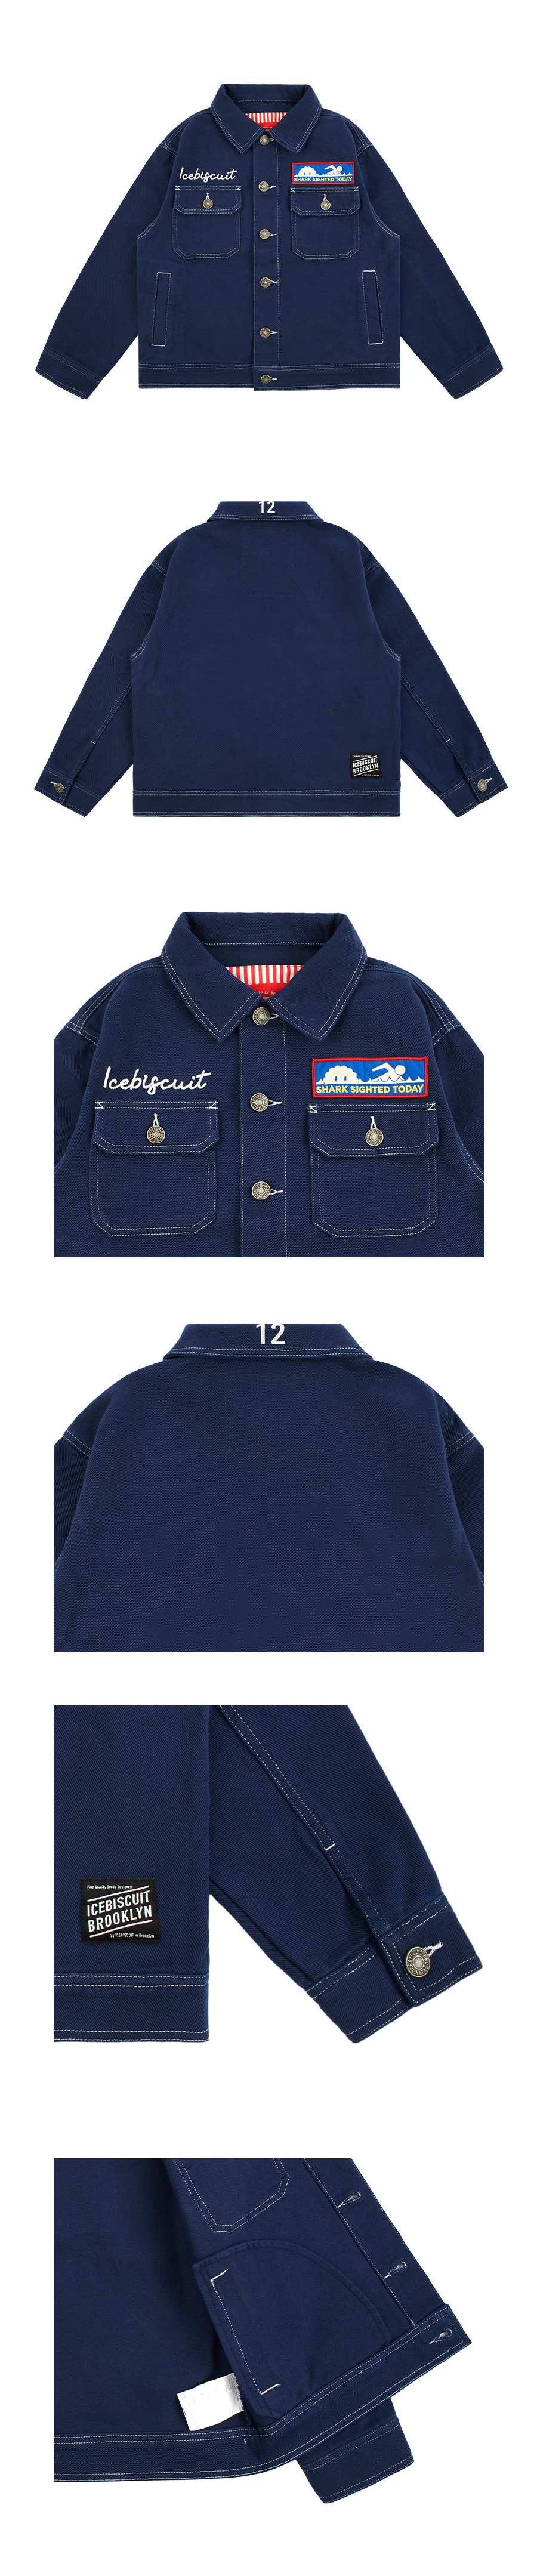 Icebiscuit graphic point work jacket 상세 이미지